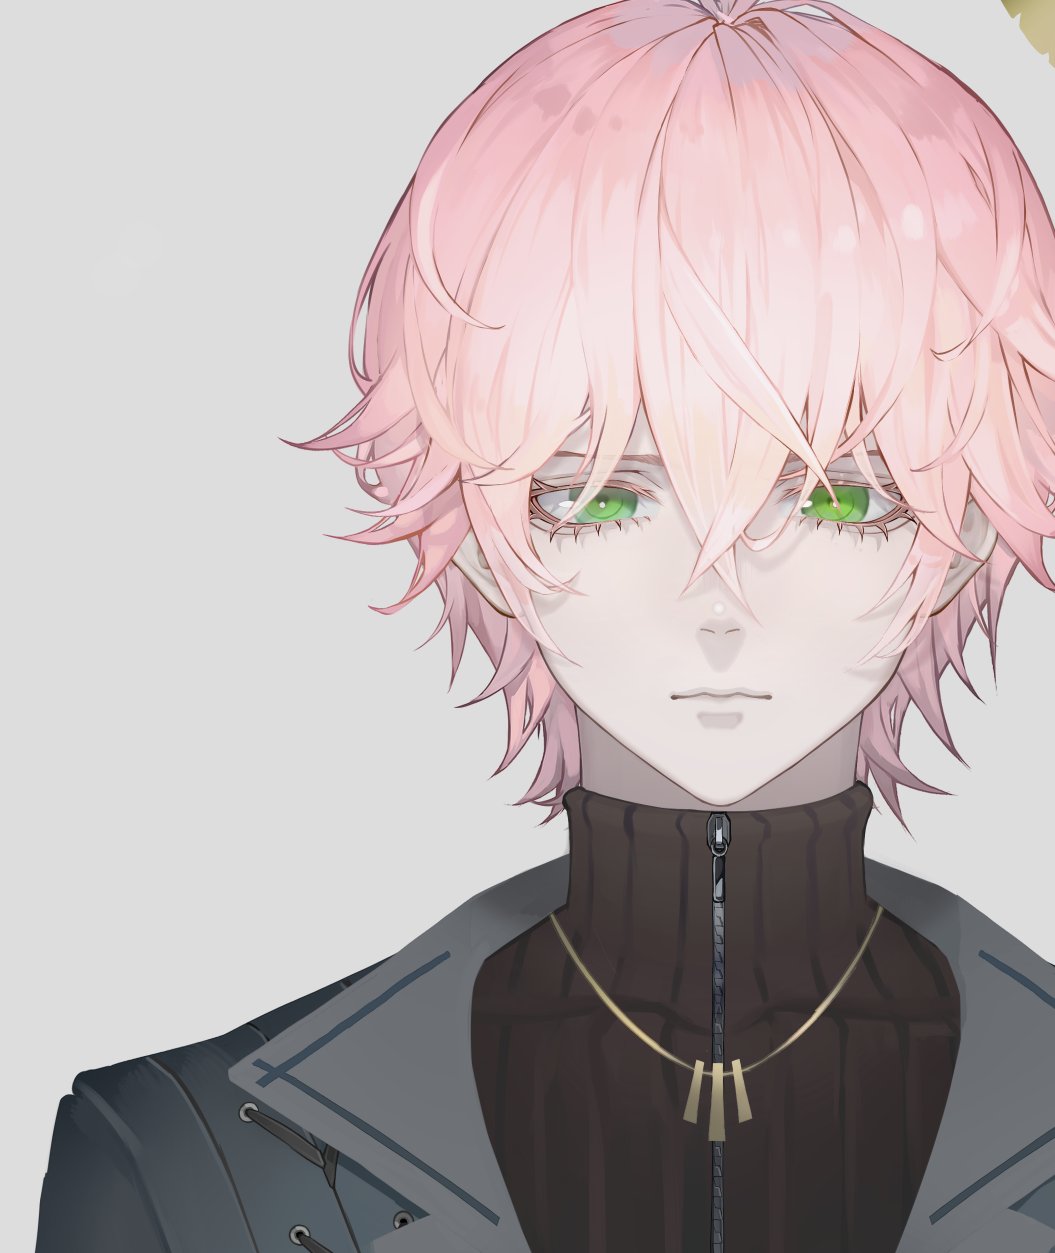 Anime Boy Pink Hair - Curly Haired Anime Girl, HD Png Download ,  Transparent Png Image - PNGitem